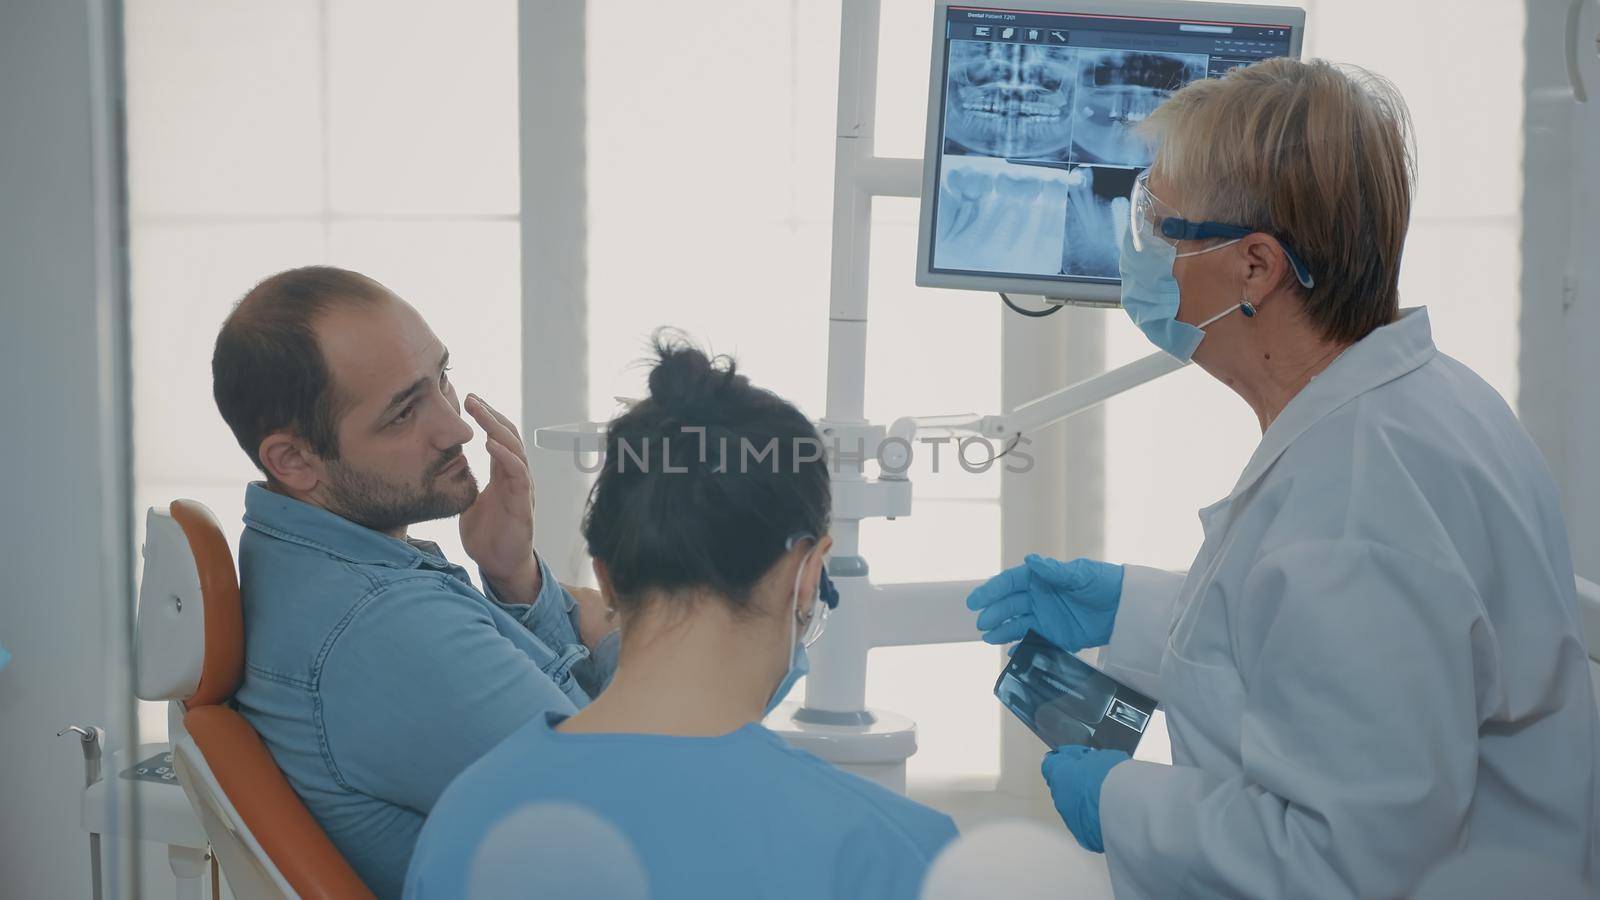 Dentist and nurse explaining x ray scan to patient with toothache in stomatology cabinet. Team of specialists doing oral care consultation to treat man in pain with denture problem.